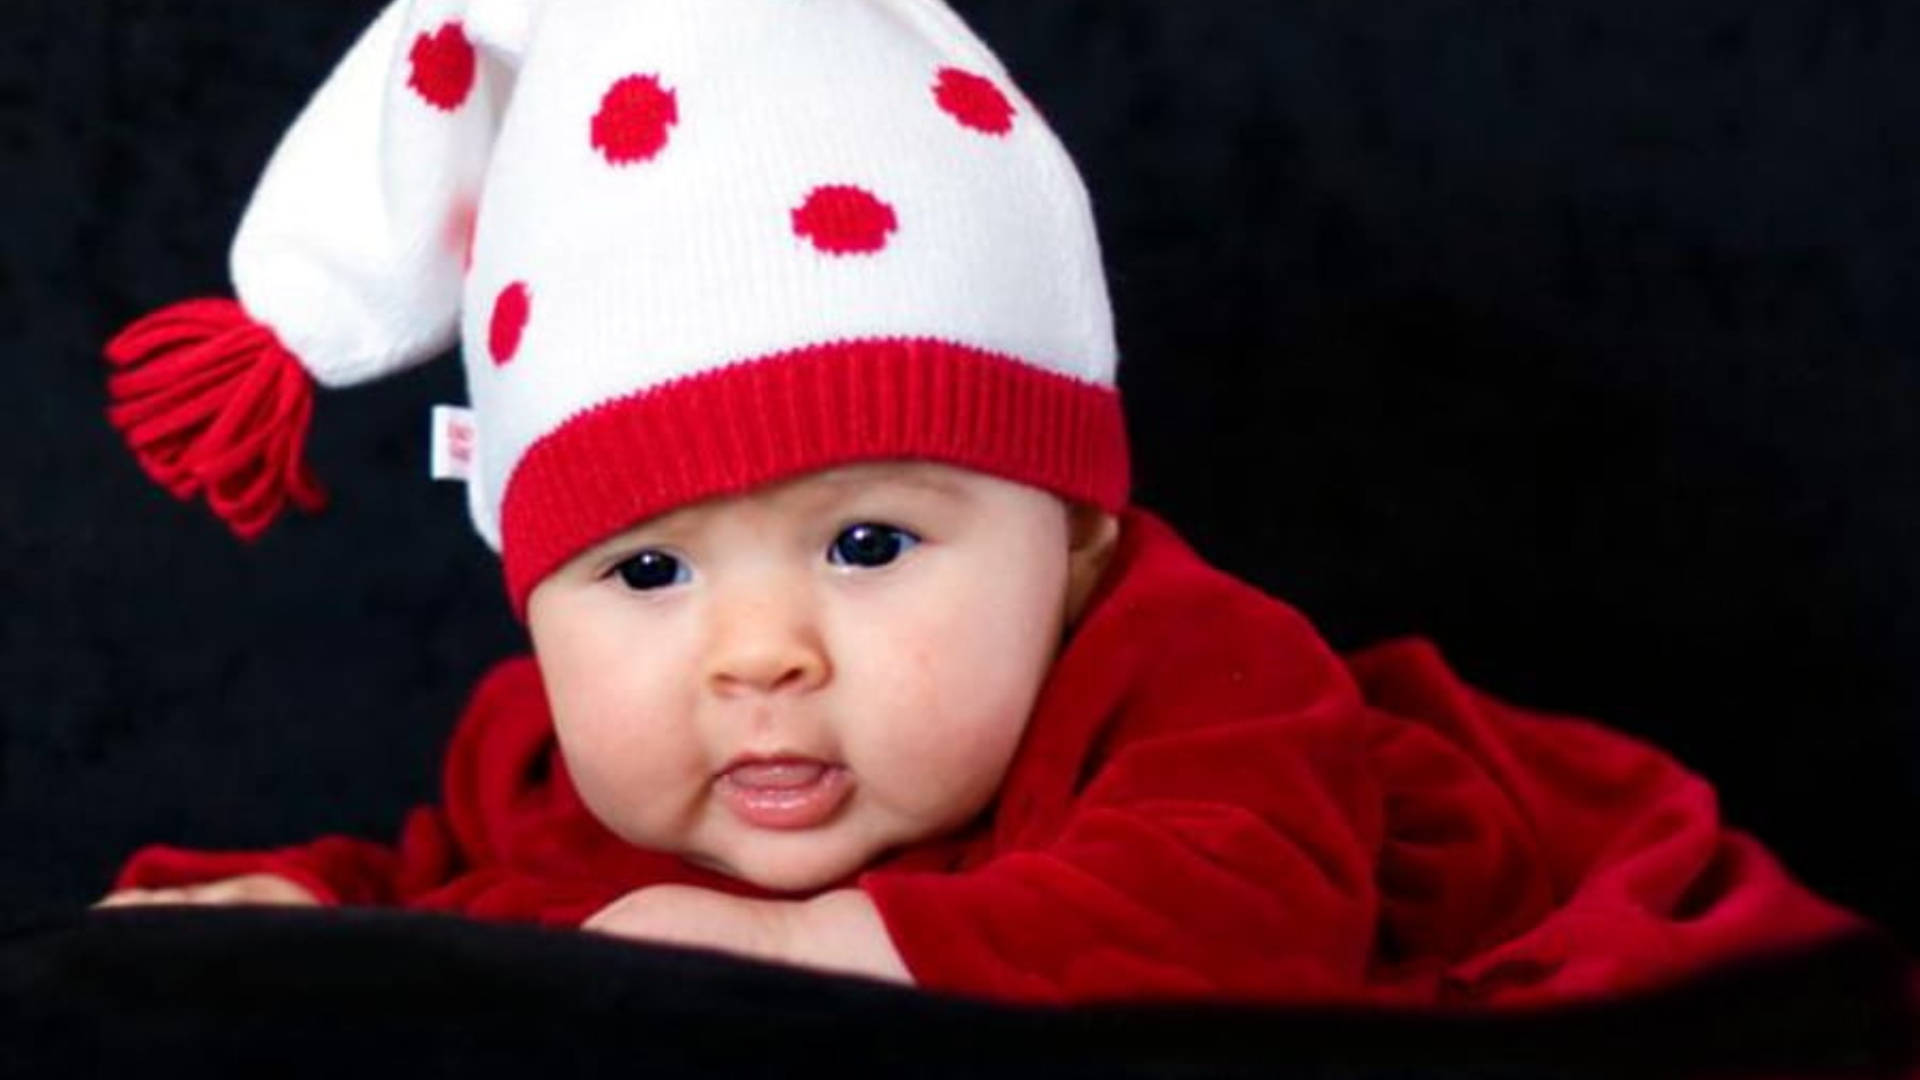 Adorable Baby in Red Outfit Expressing Love Wallpaper